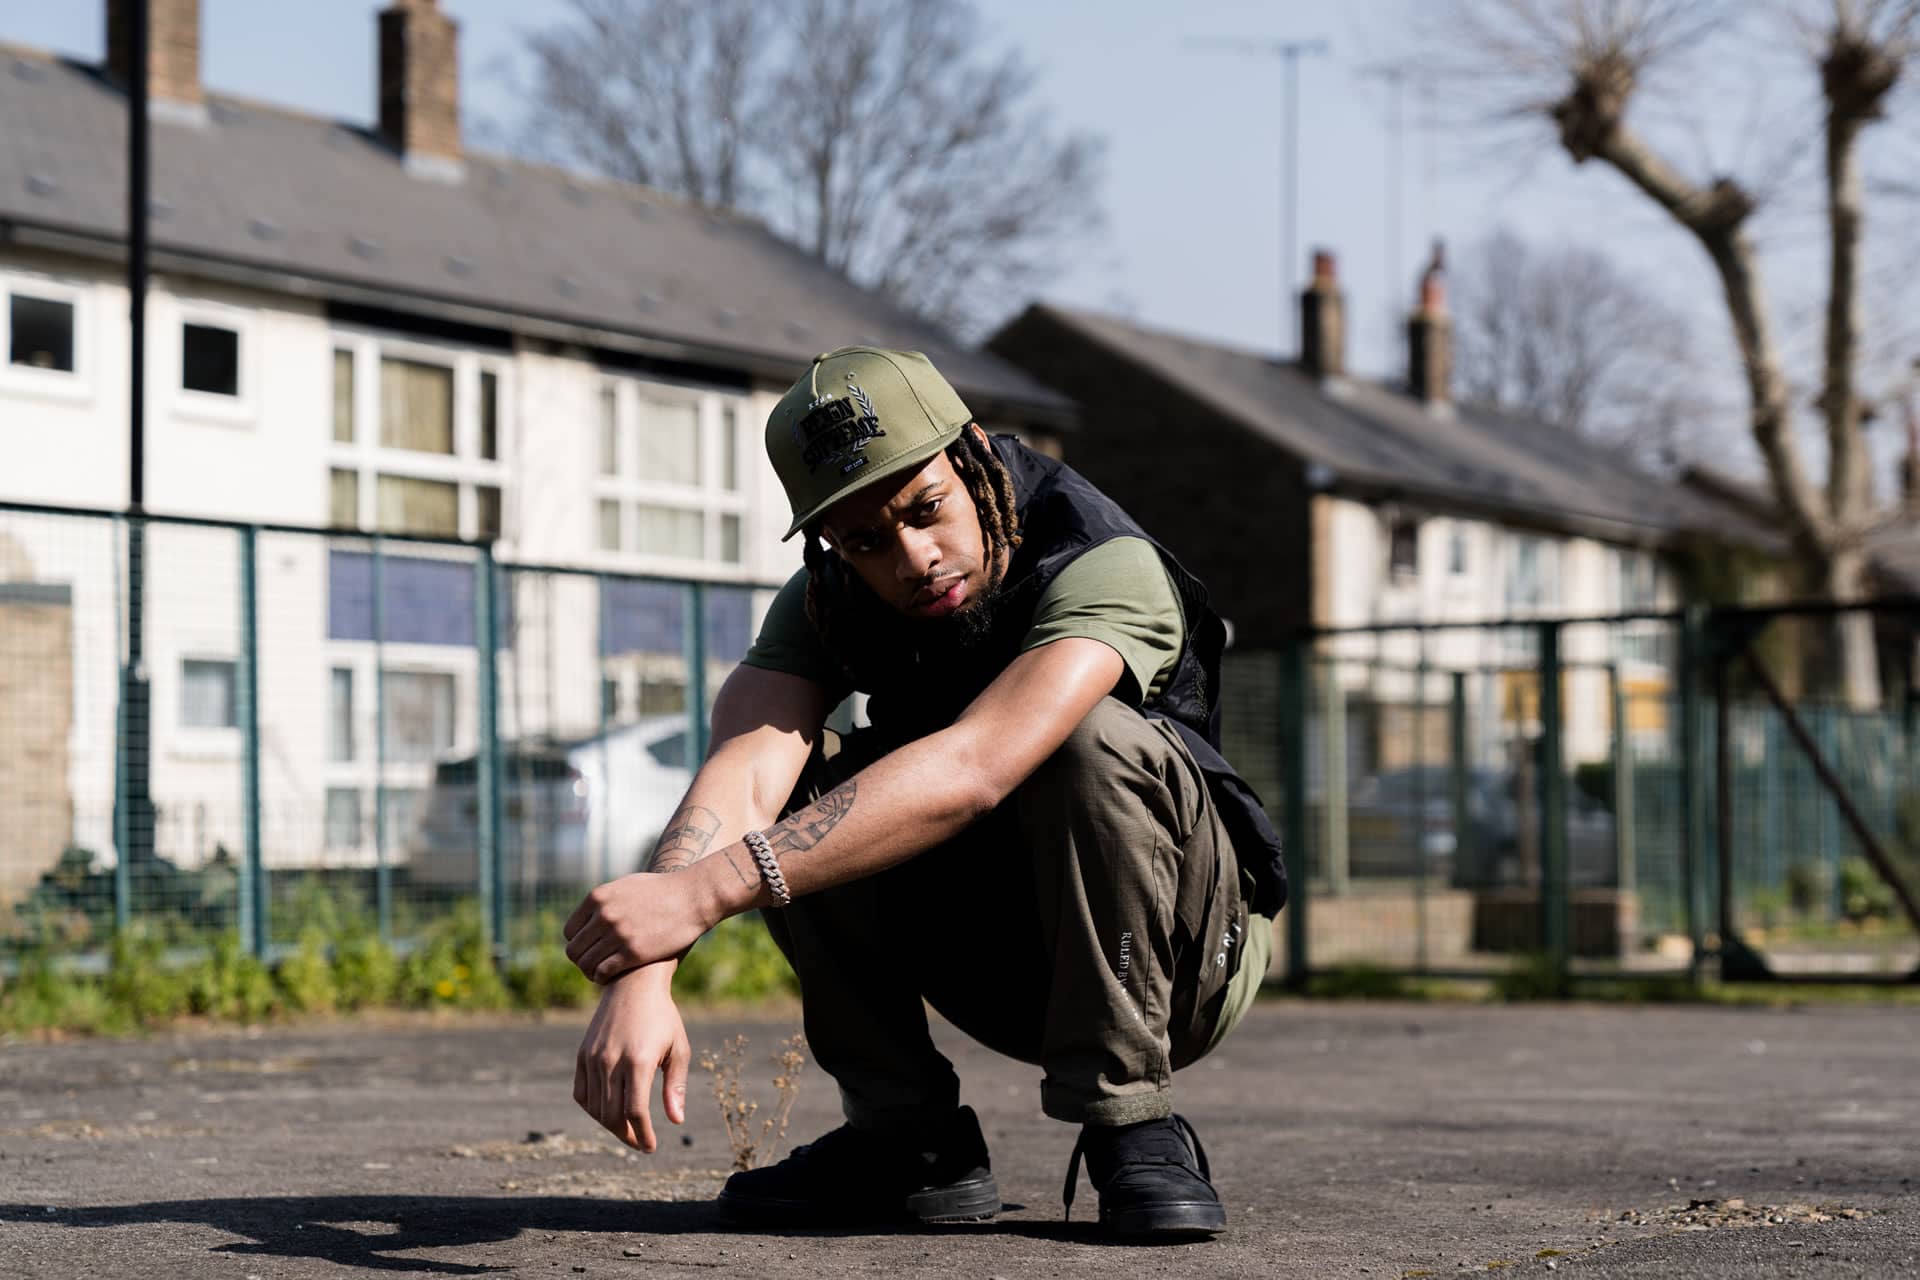 Bandanna wears King Apparel Earlham Tech snapback cap, t-shirt and cargo pants in fern green and tactical vest in black